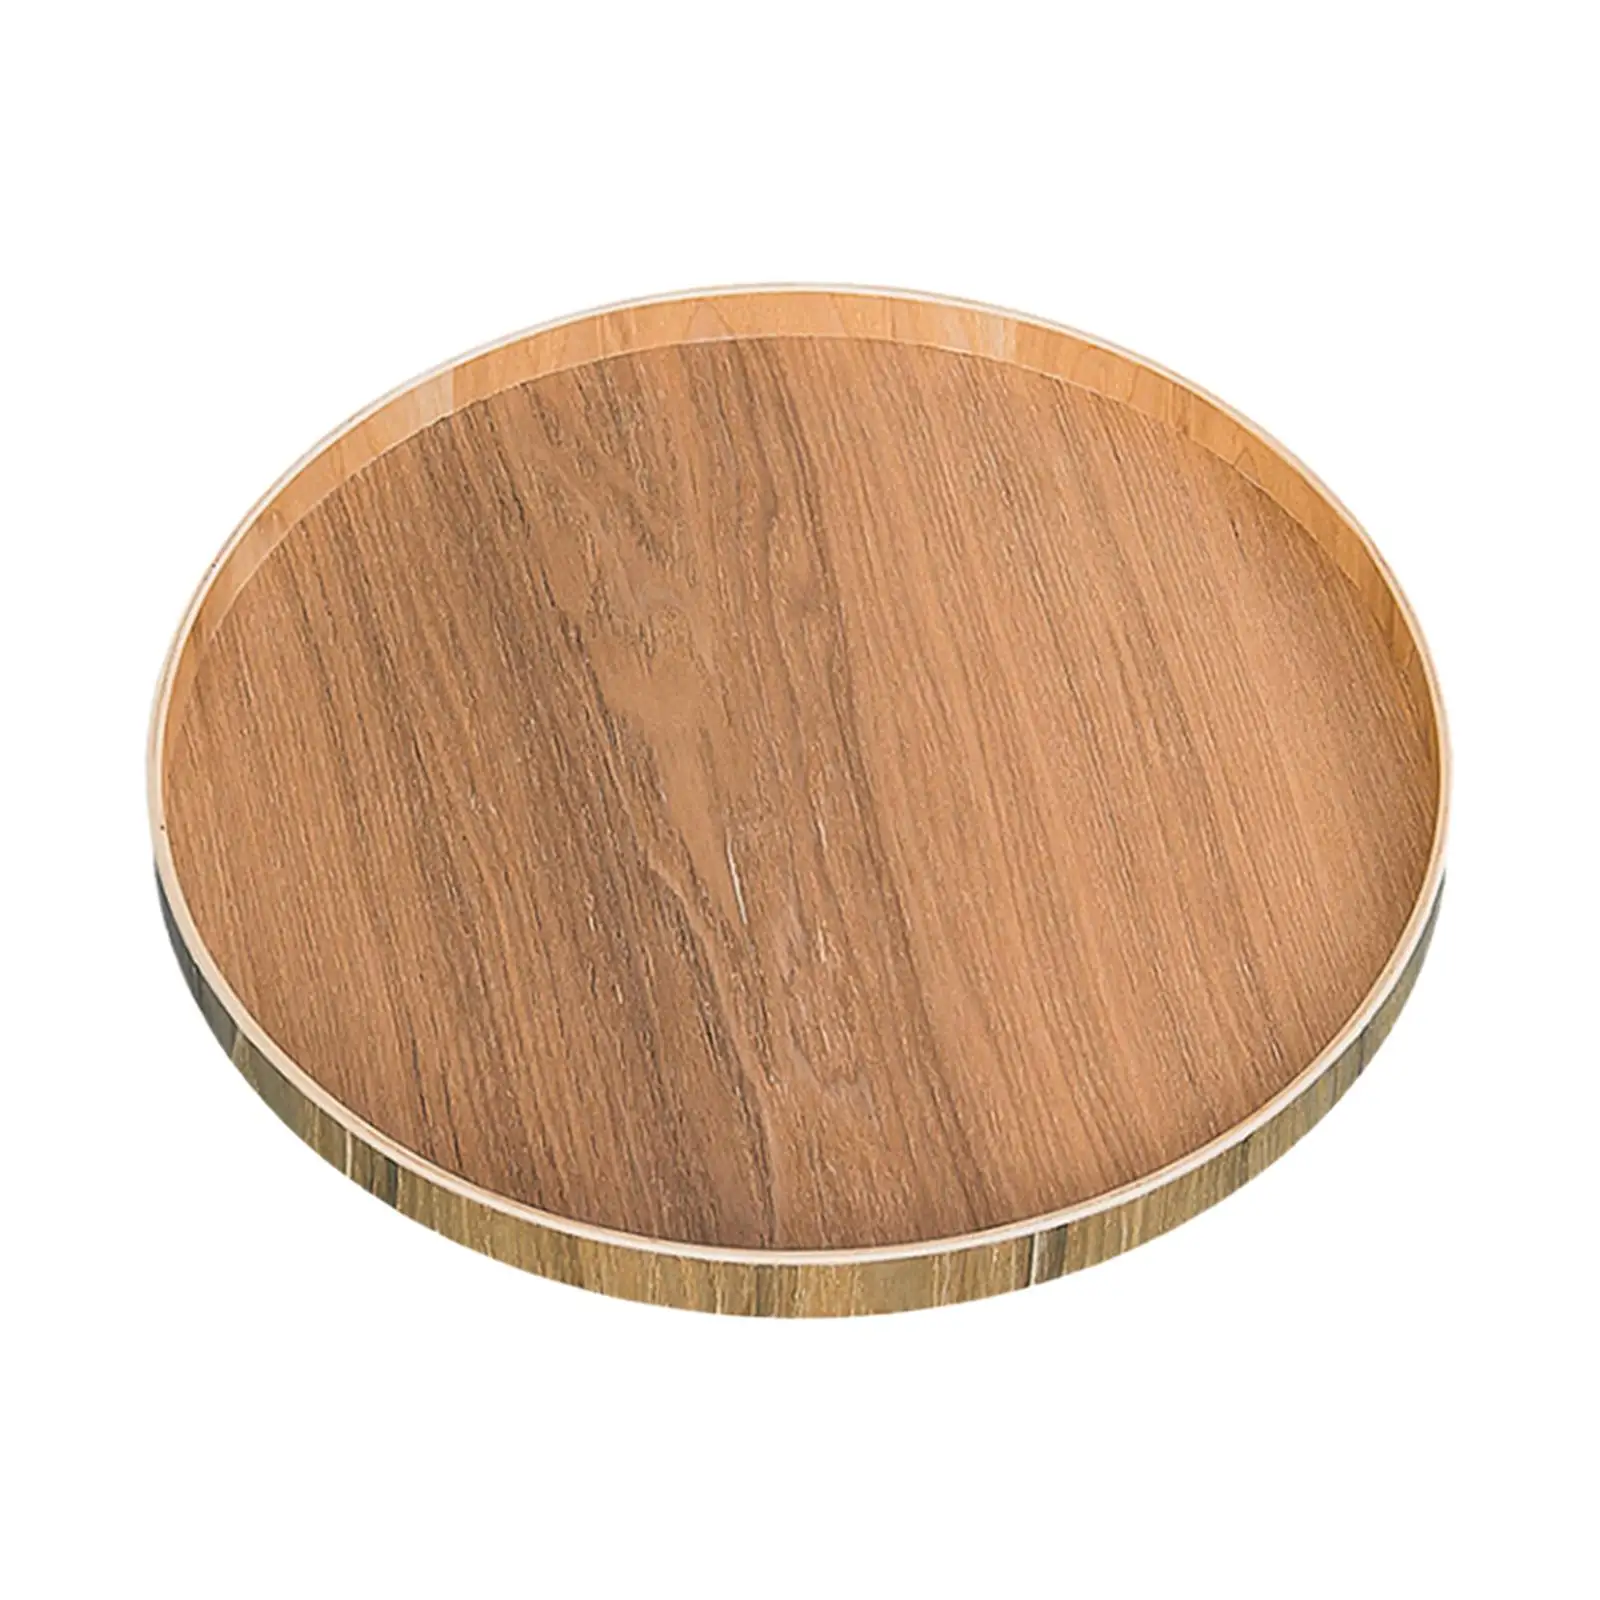 Wooden Serving Tray Farmhouse Decorative Tray Appetizer Organizer for Kitchen Dining Table Pantry Home Table Centerpiece